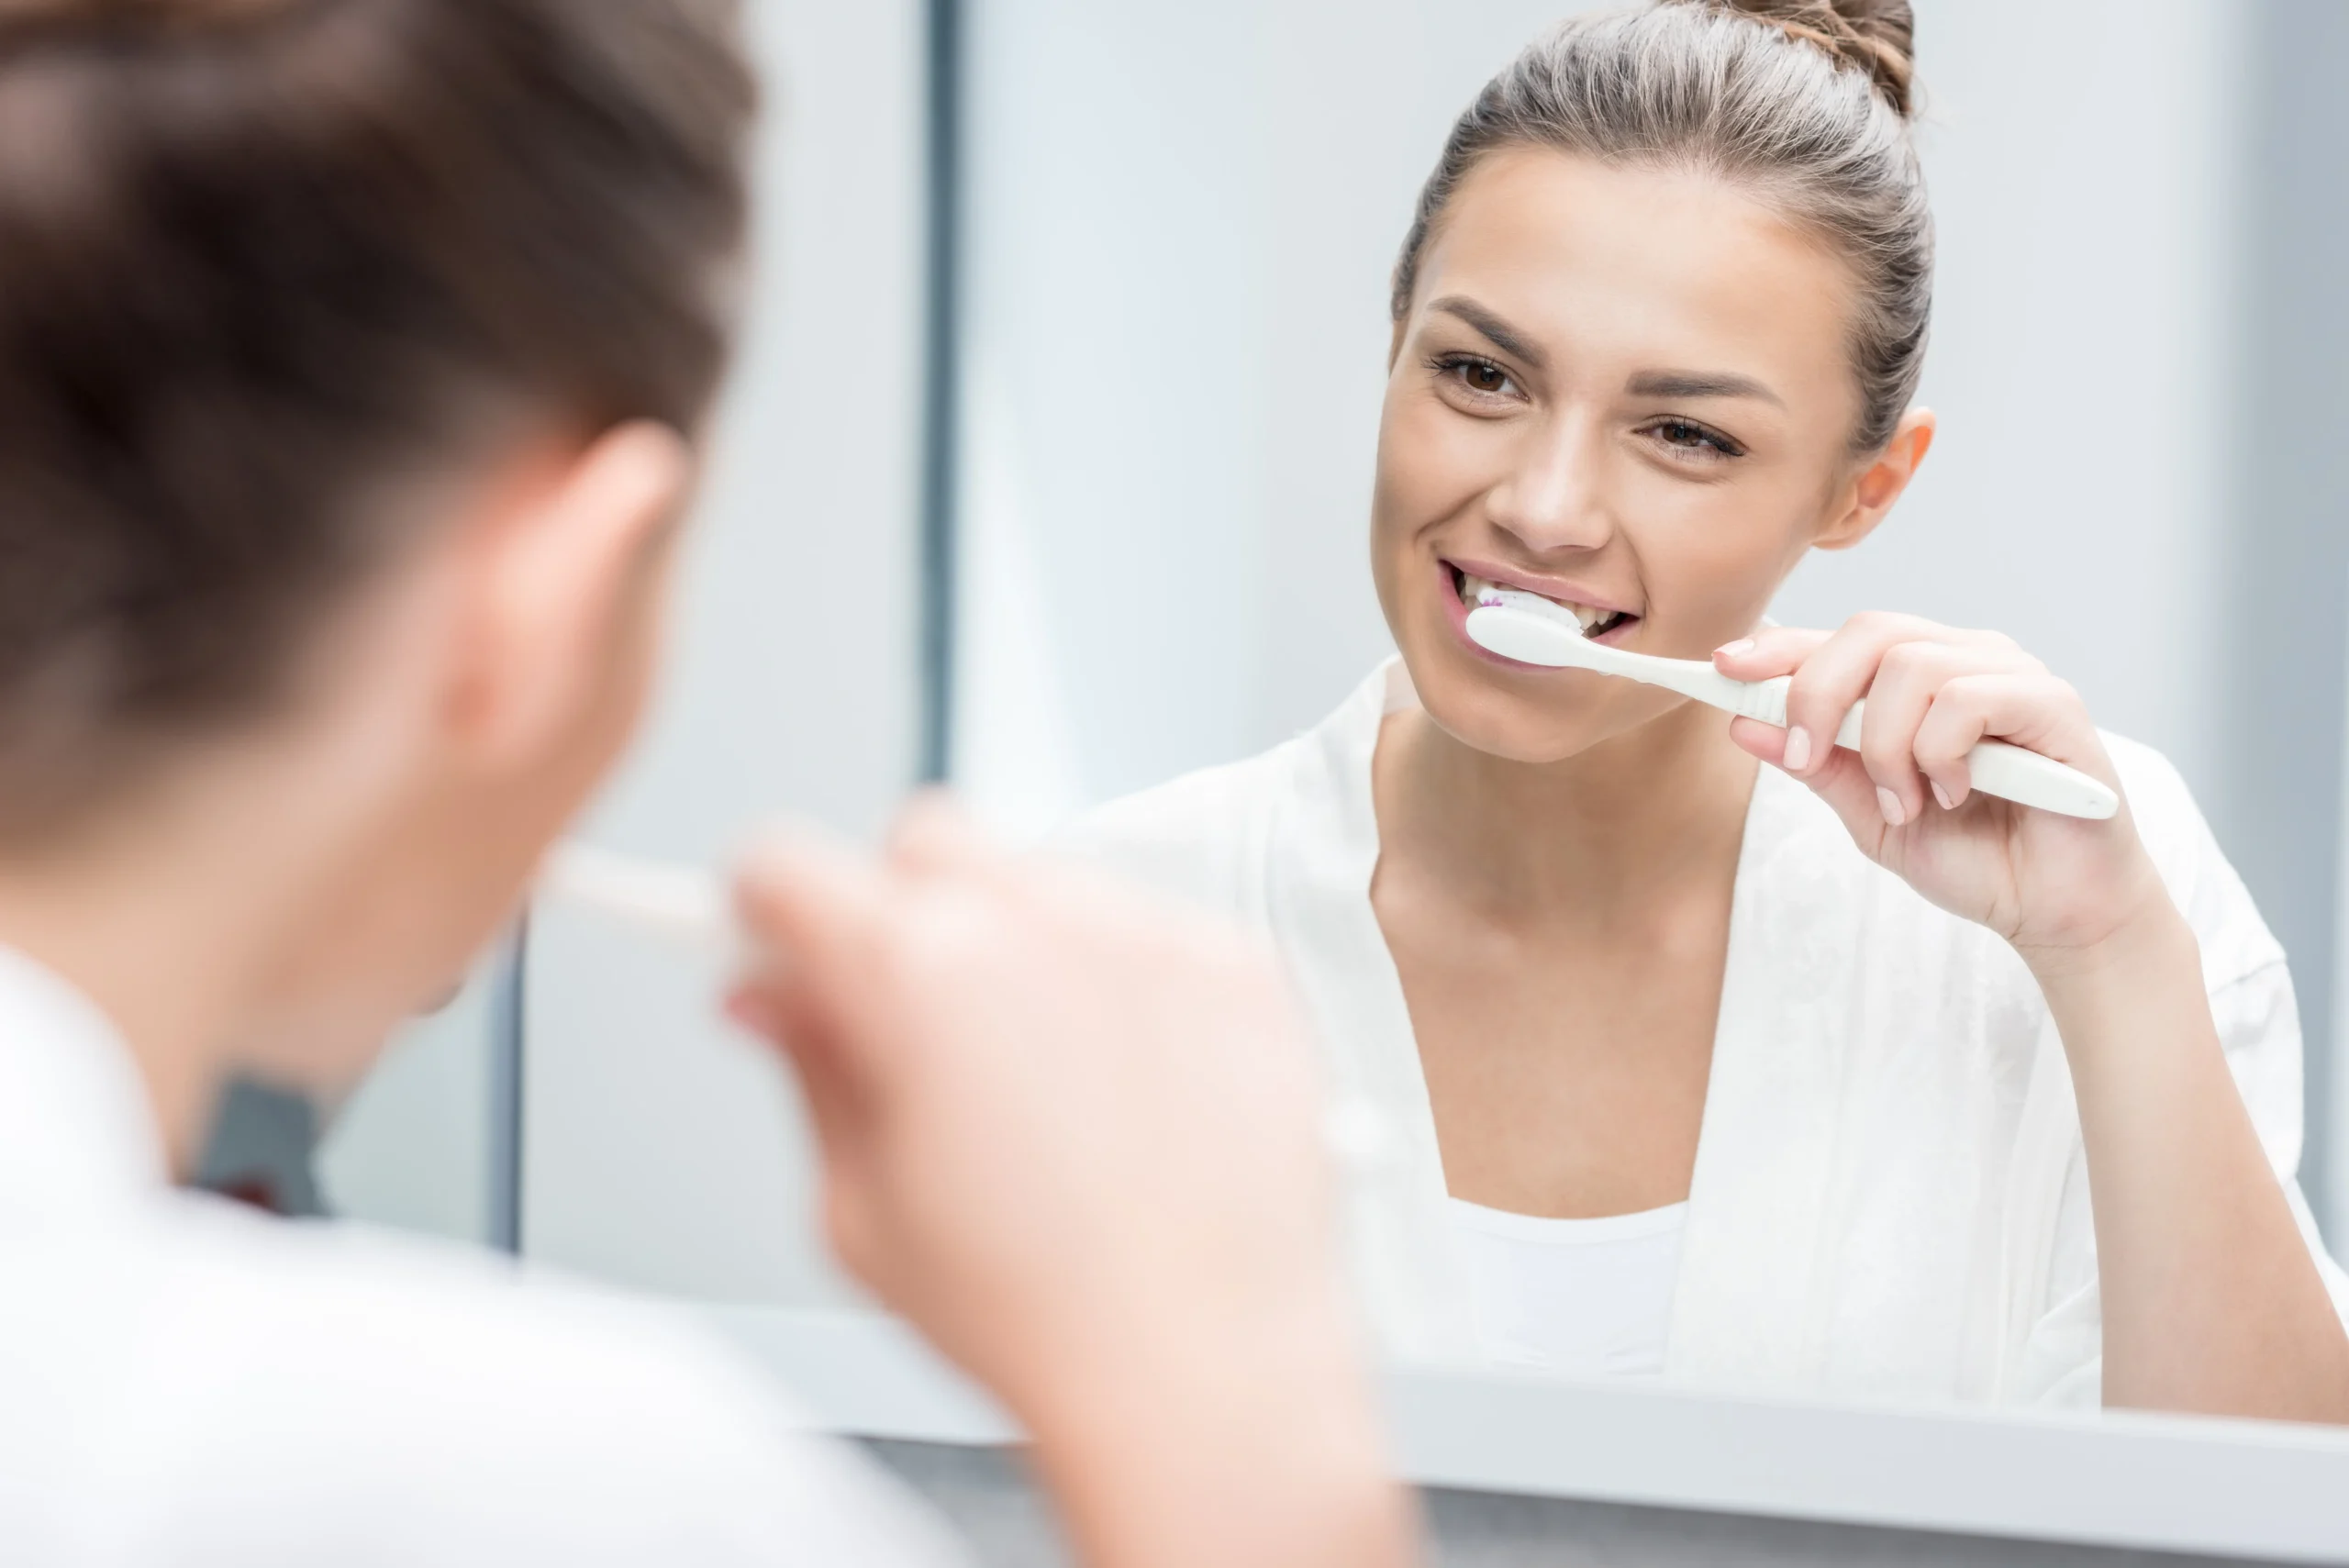 A young woman looking in the bathroom mirror brushing her teeth